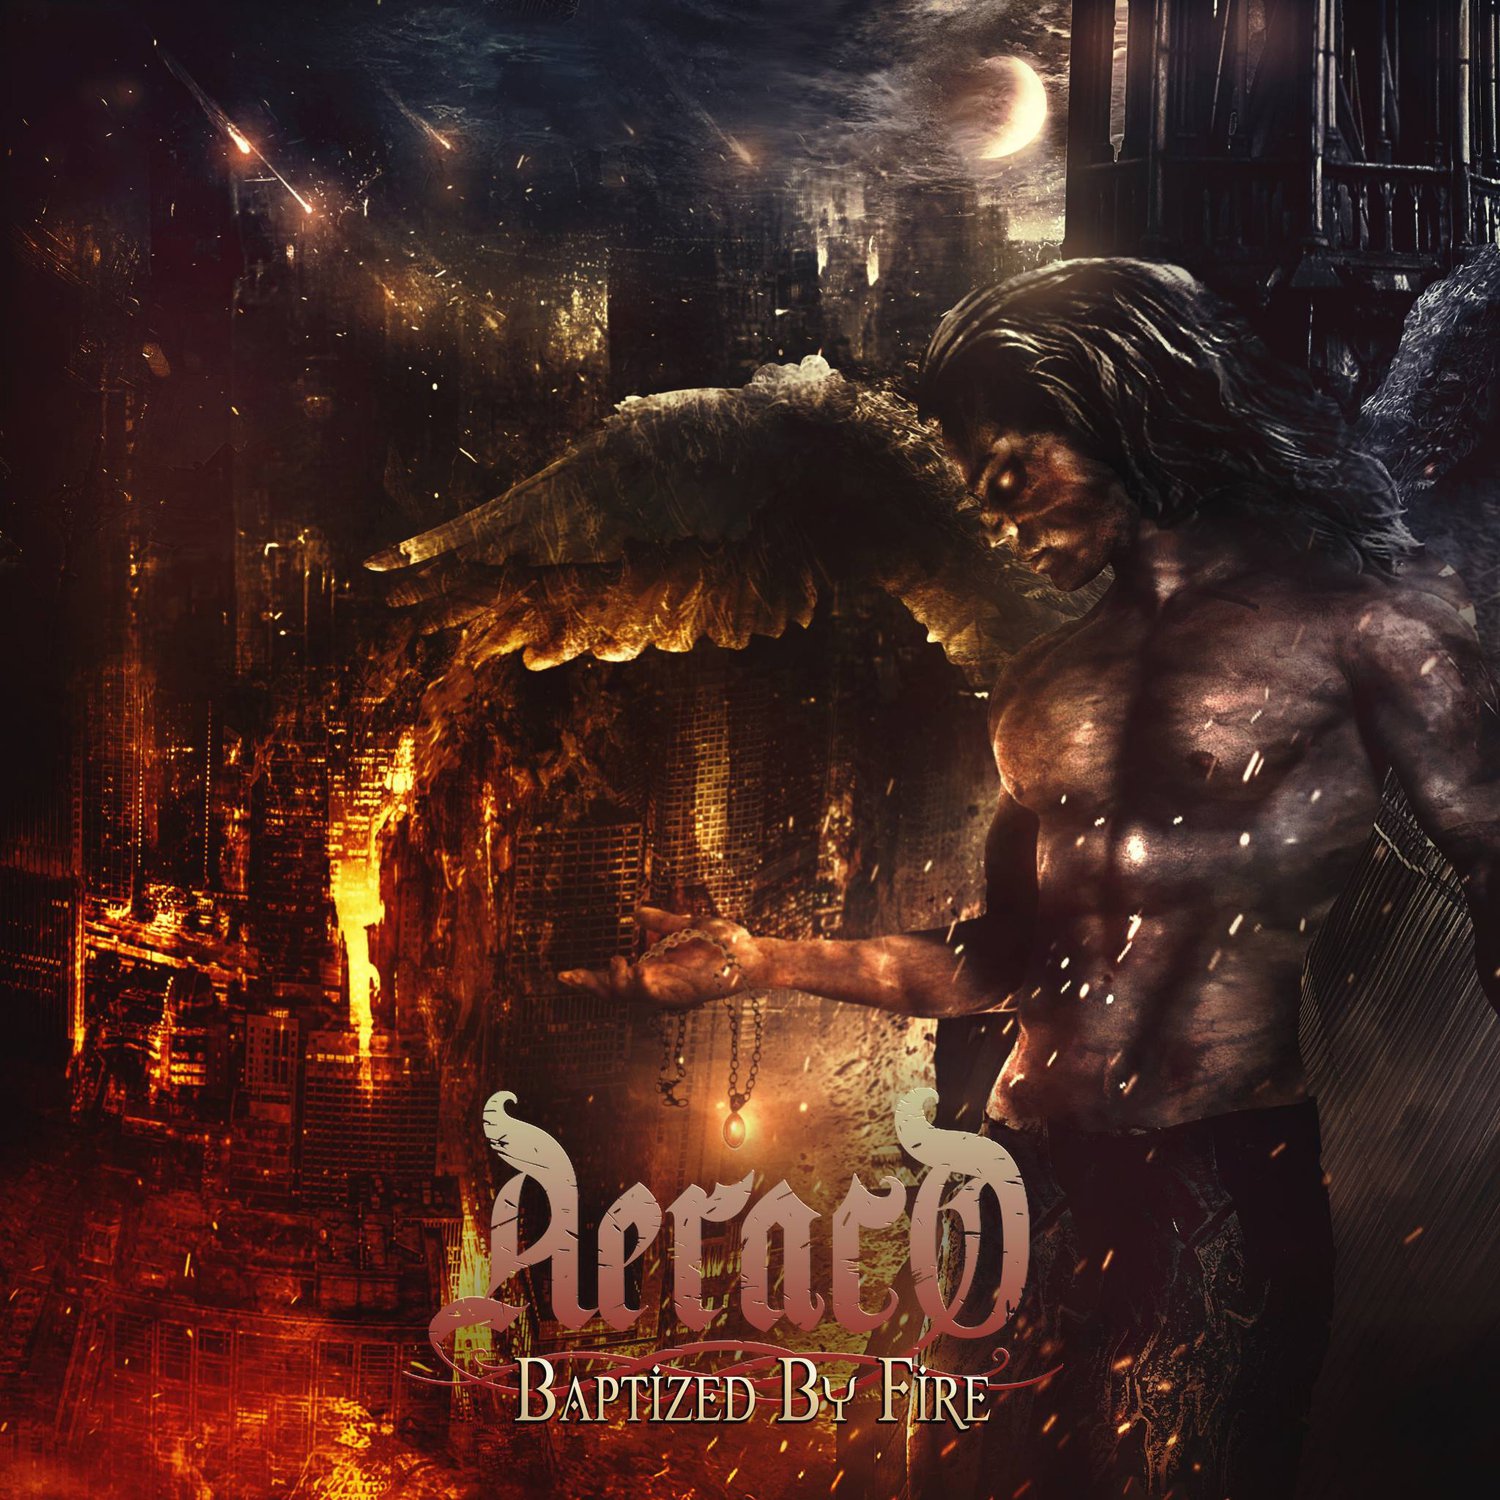 Baptized by Fire by Aeraco USB Wristband